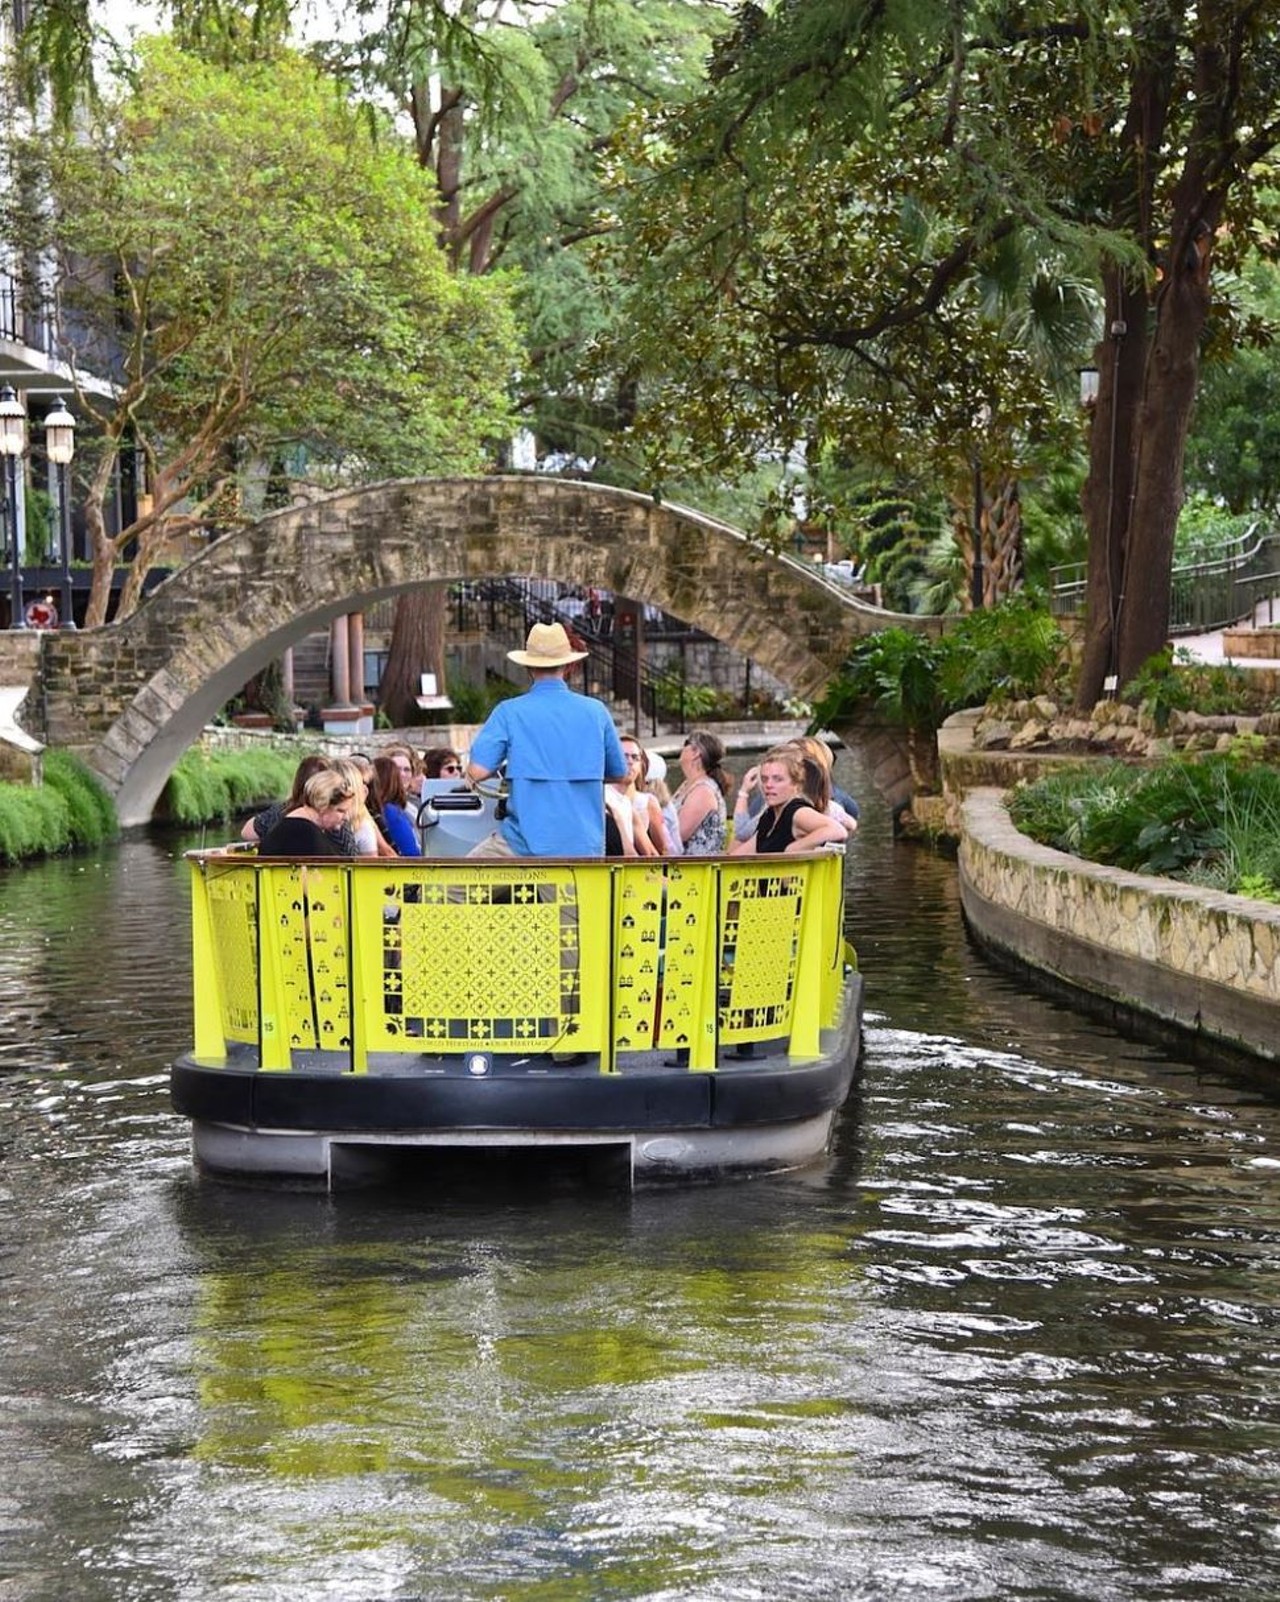 Riding in a barge on the River Walk
Riding a barge on the River Walk? This may be one of the oldest tourist traps on this list. Even though they got a recent facelift, barges have been floating down the San Antonio River since the ‘60s. Hasn’t everyone done this already? We recommend either taking a stroll on the River Walk or attending one of the special (and often free) events there instead – like the seeing the Confucius Wishing Lanterns or Jazz on the River. 
Photo via Instagram / goriocruises